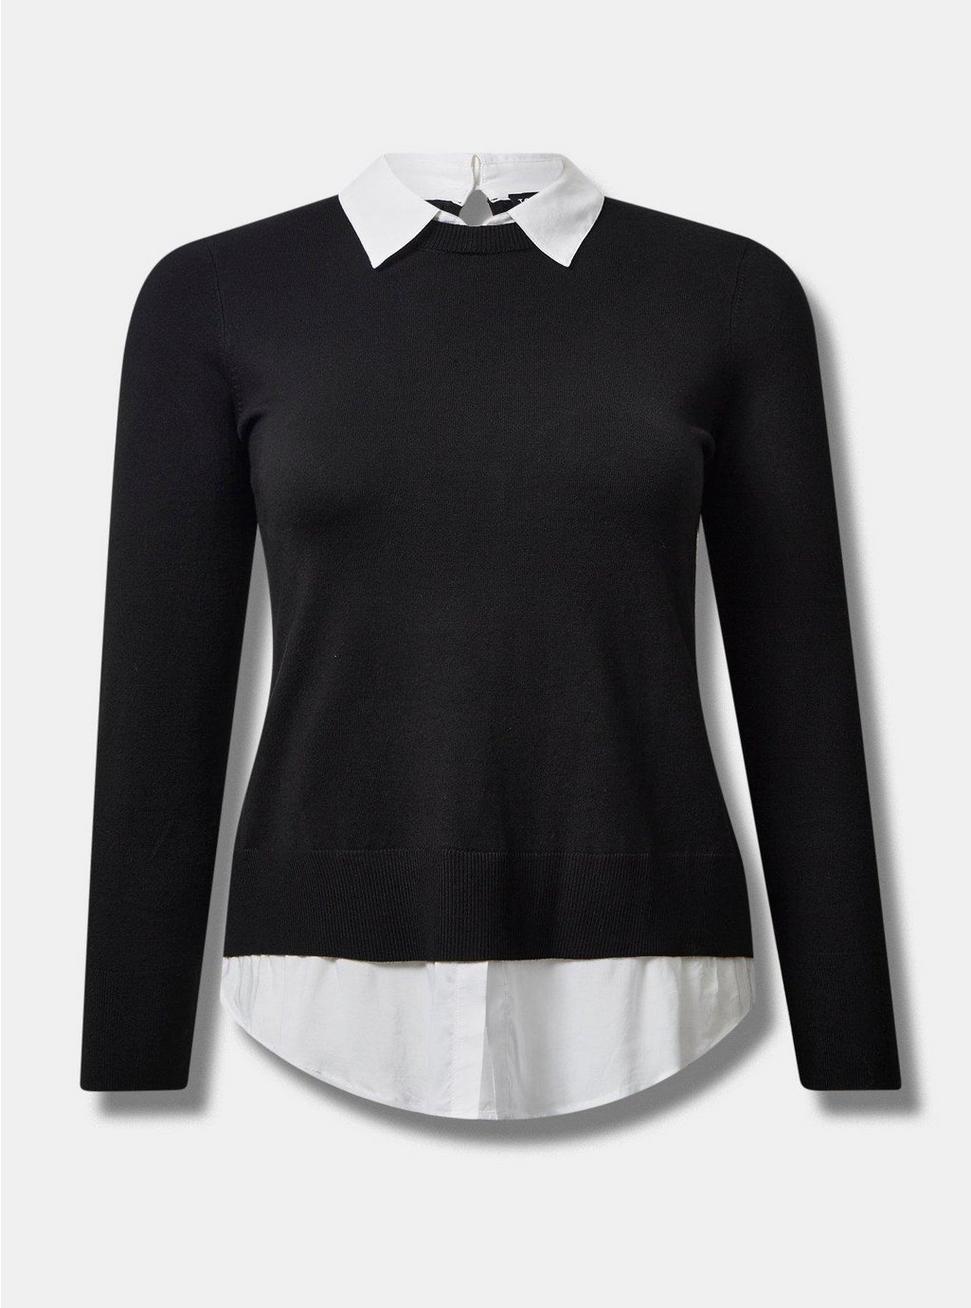 Fitted Pullover Collared 2-Fer Sweater, DEEP BLACK, hi-res